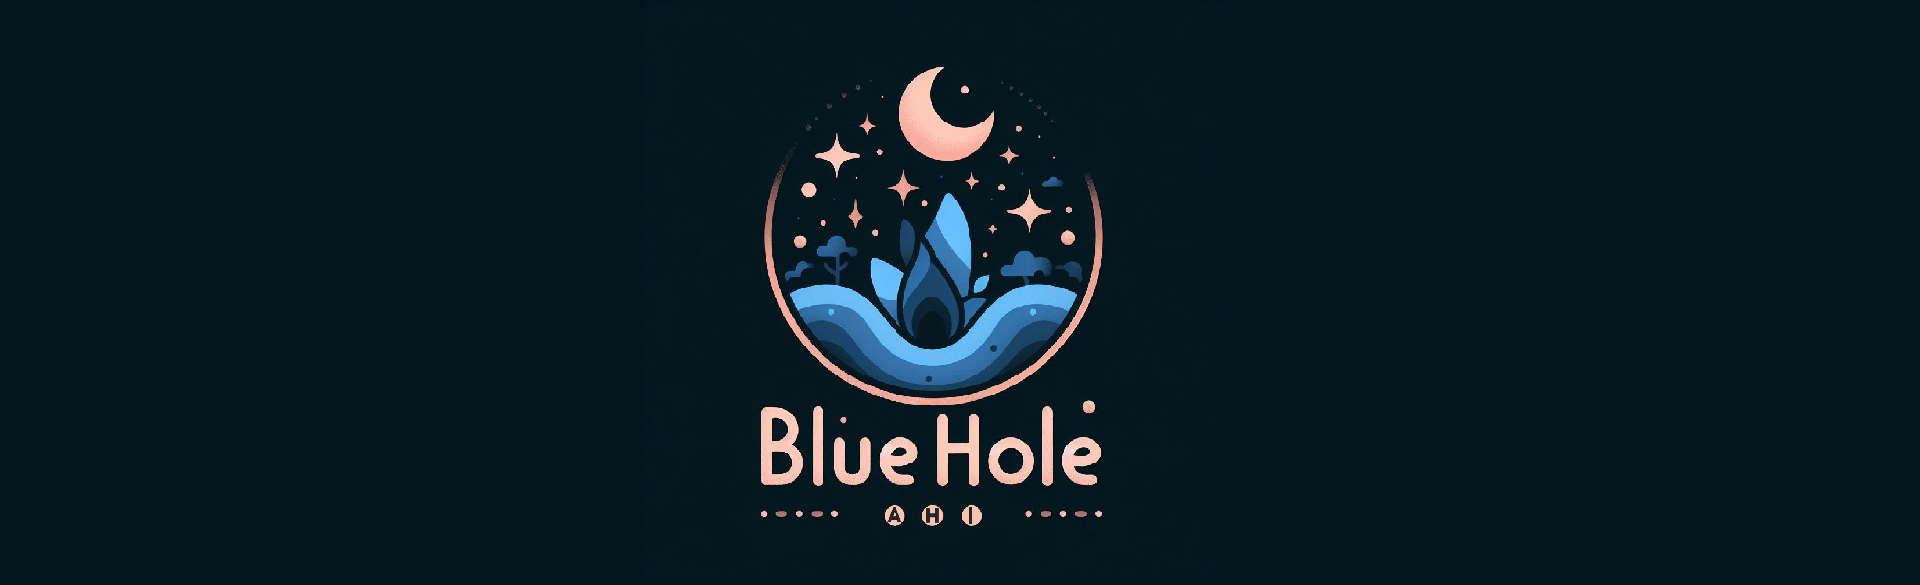 Bluehole Project